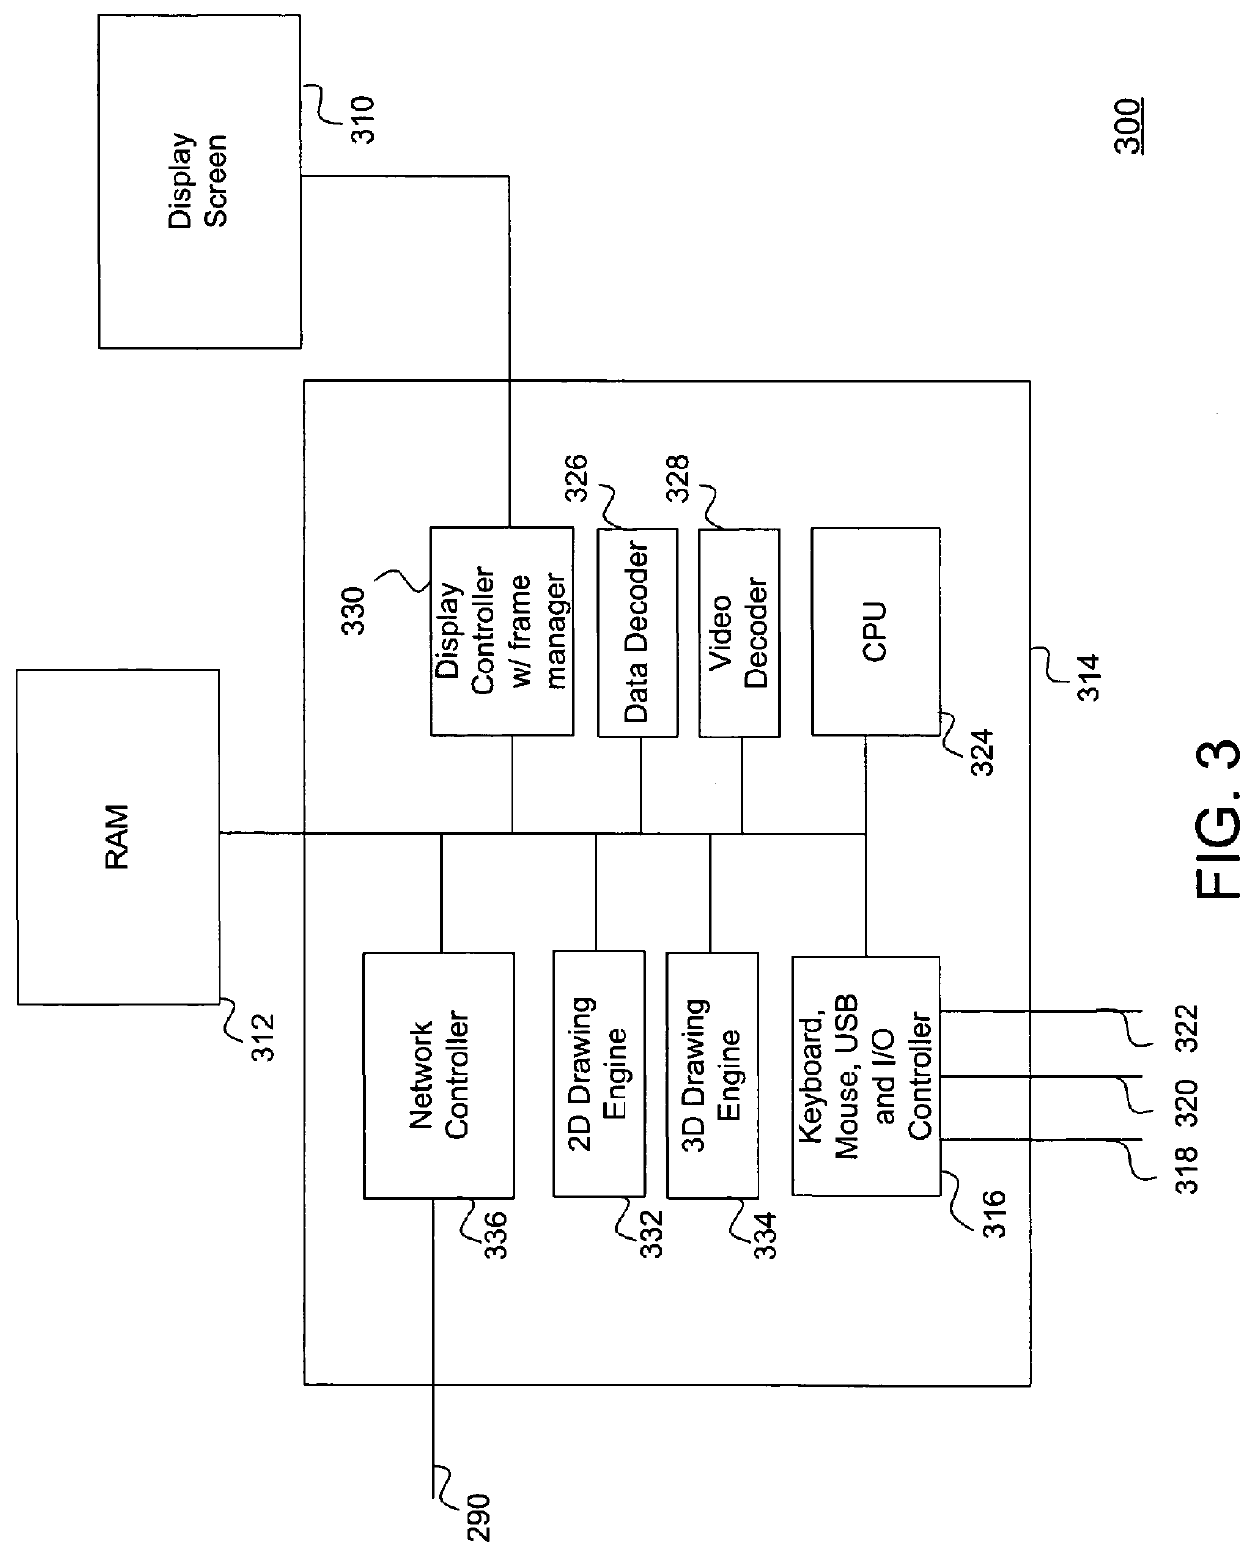 Graphics display system for multiple remote terminals